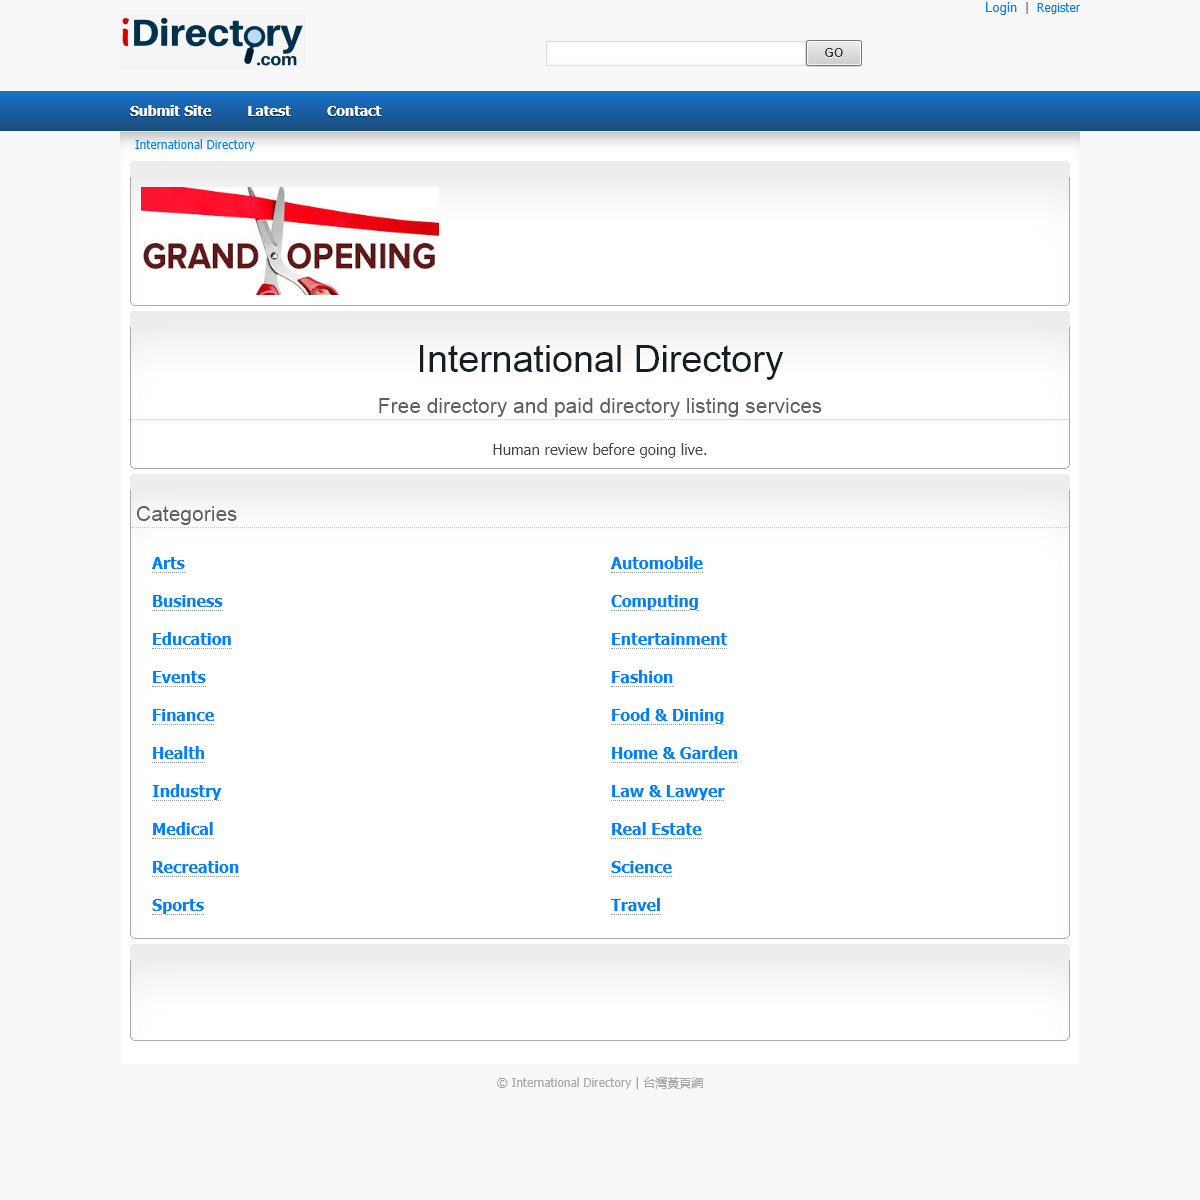 A complete backup of idirectory.com